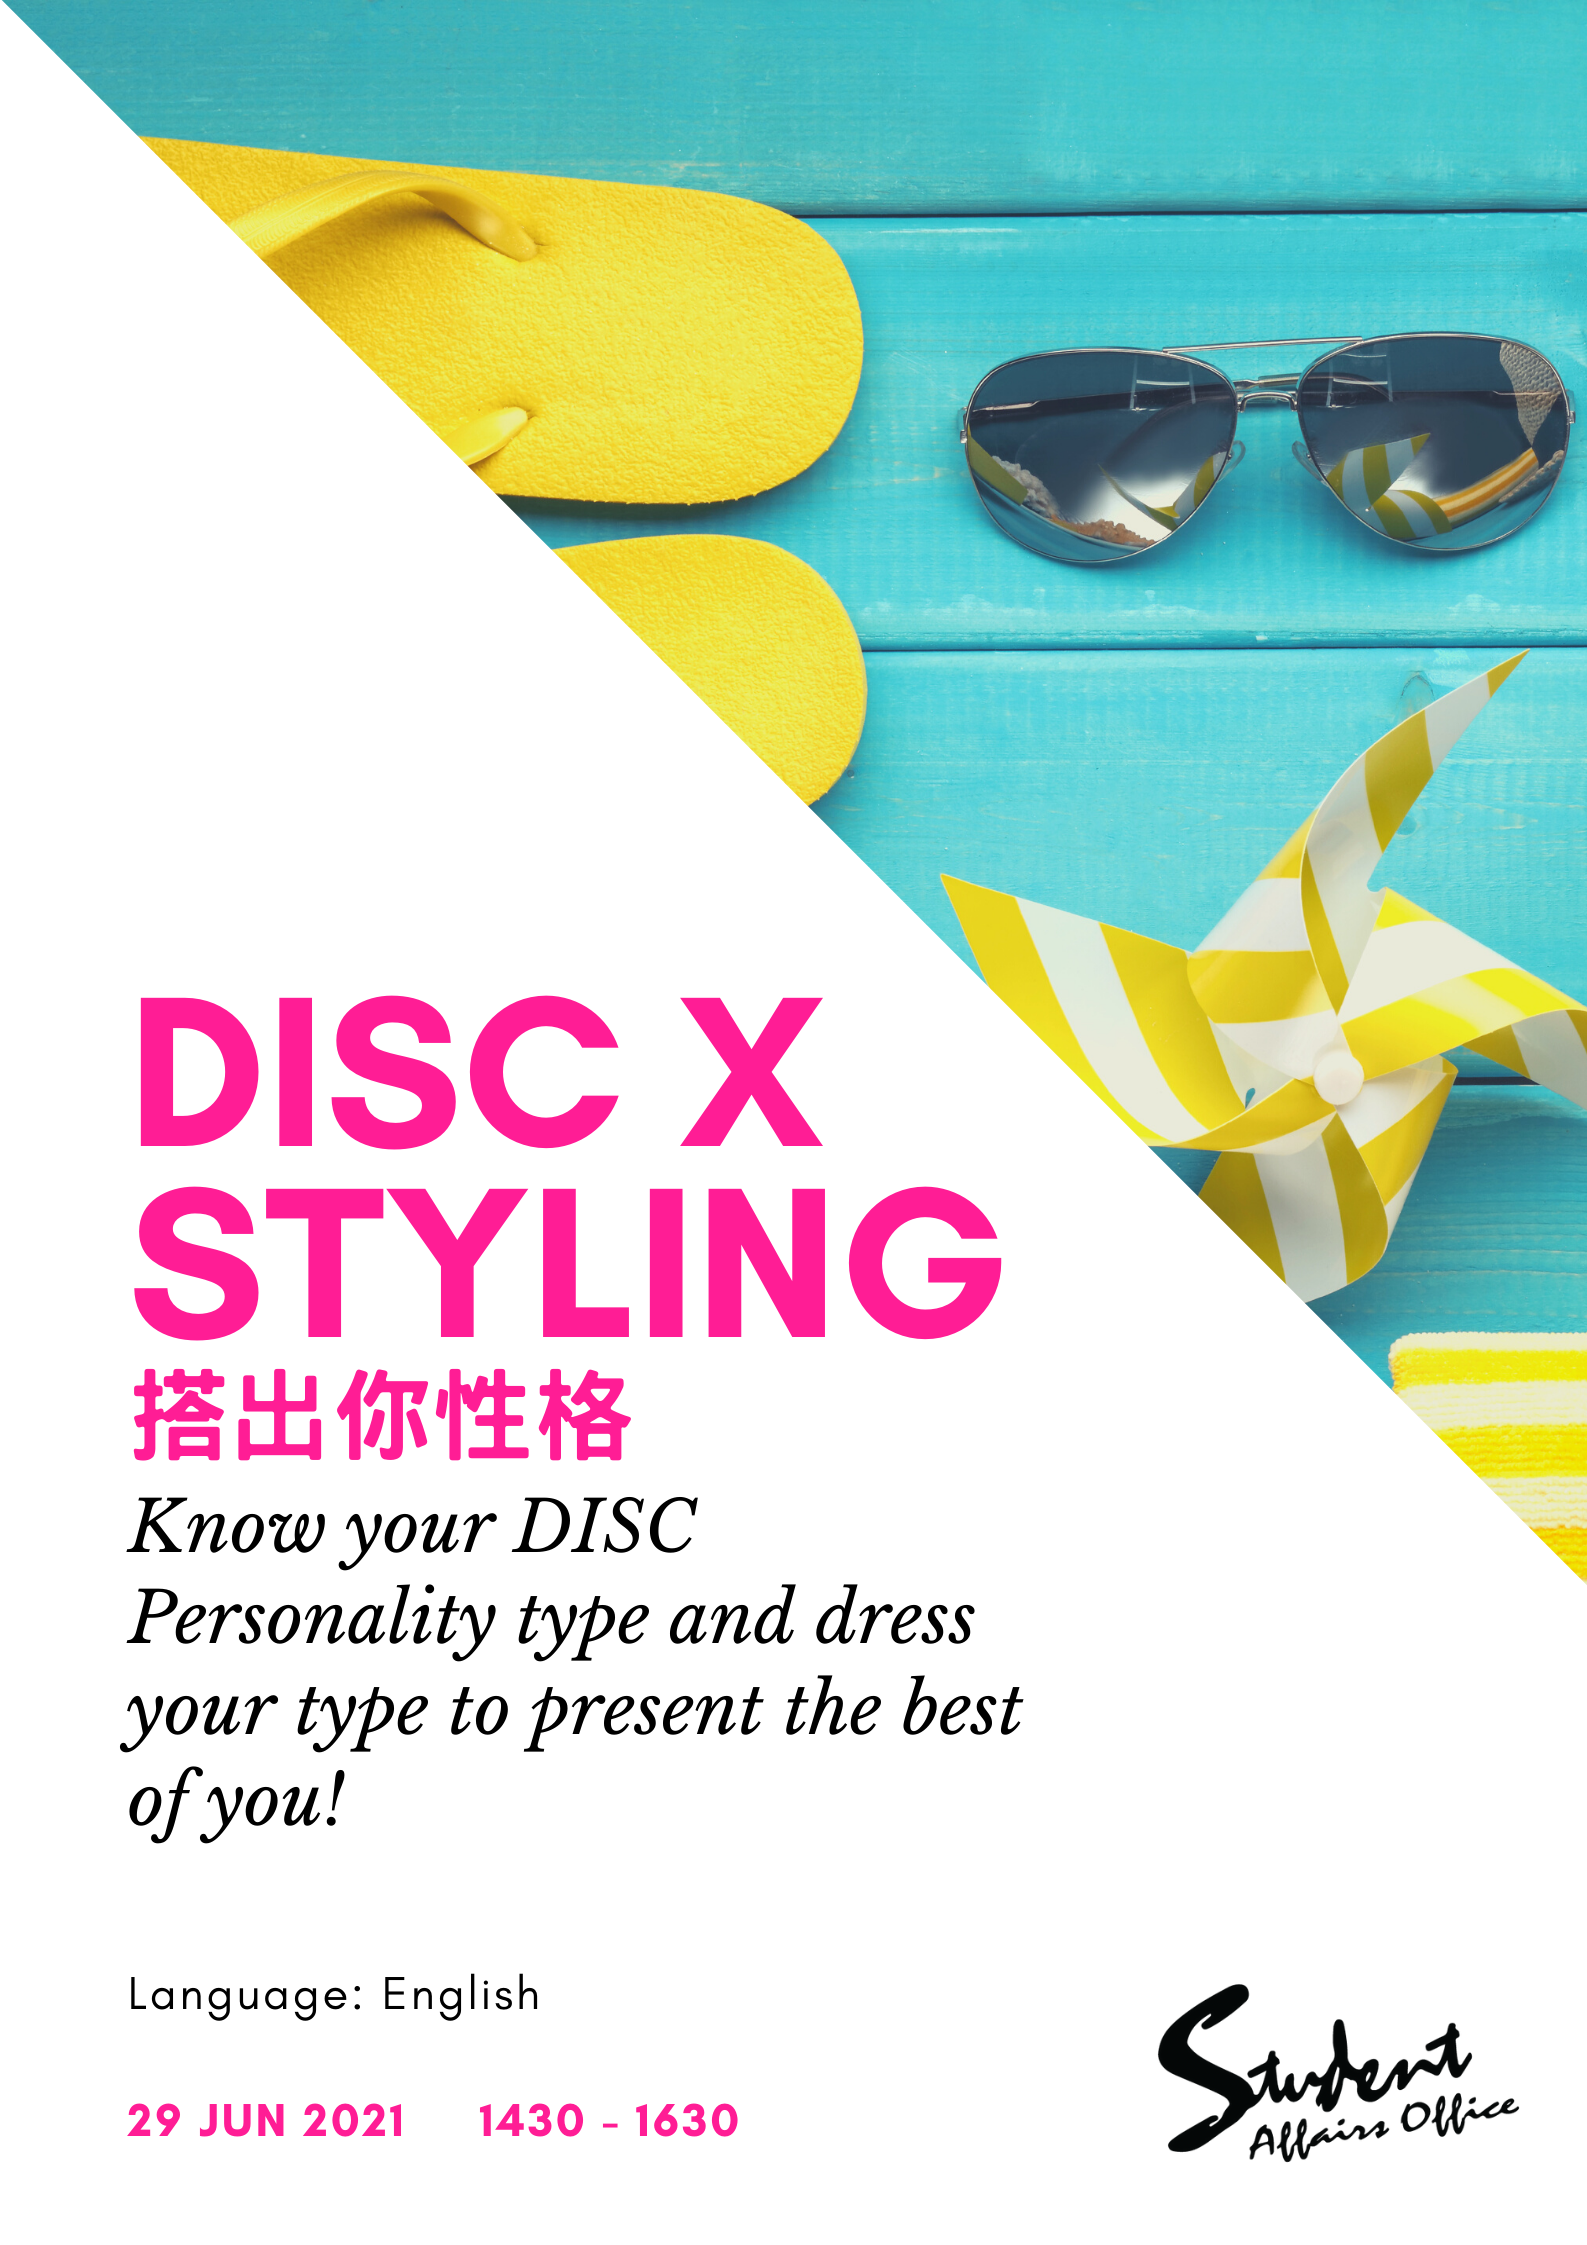 Self Photos / Files - DISC X STYLING